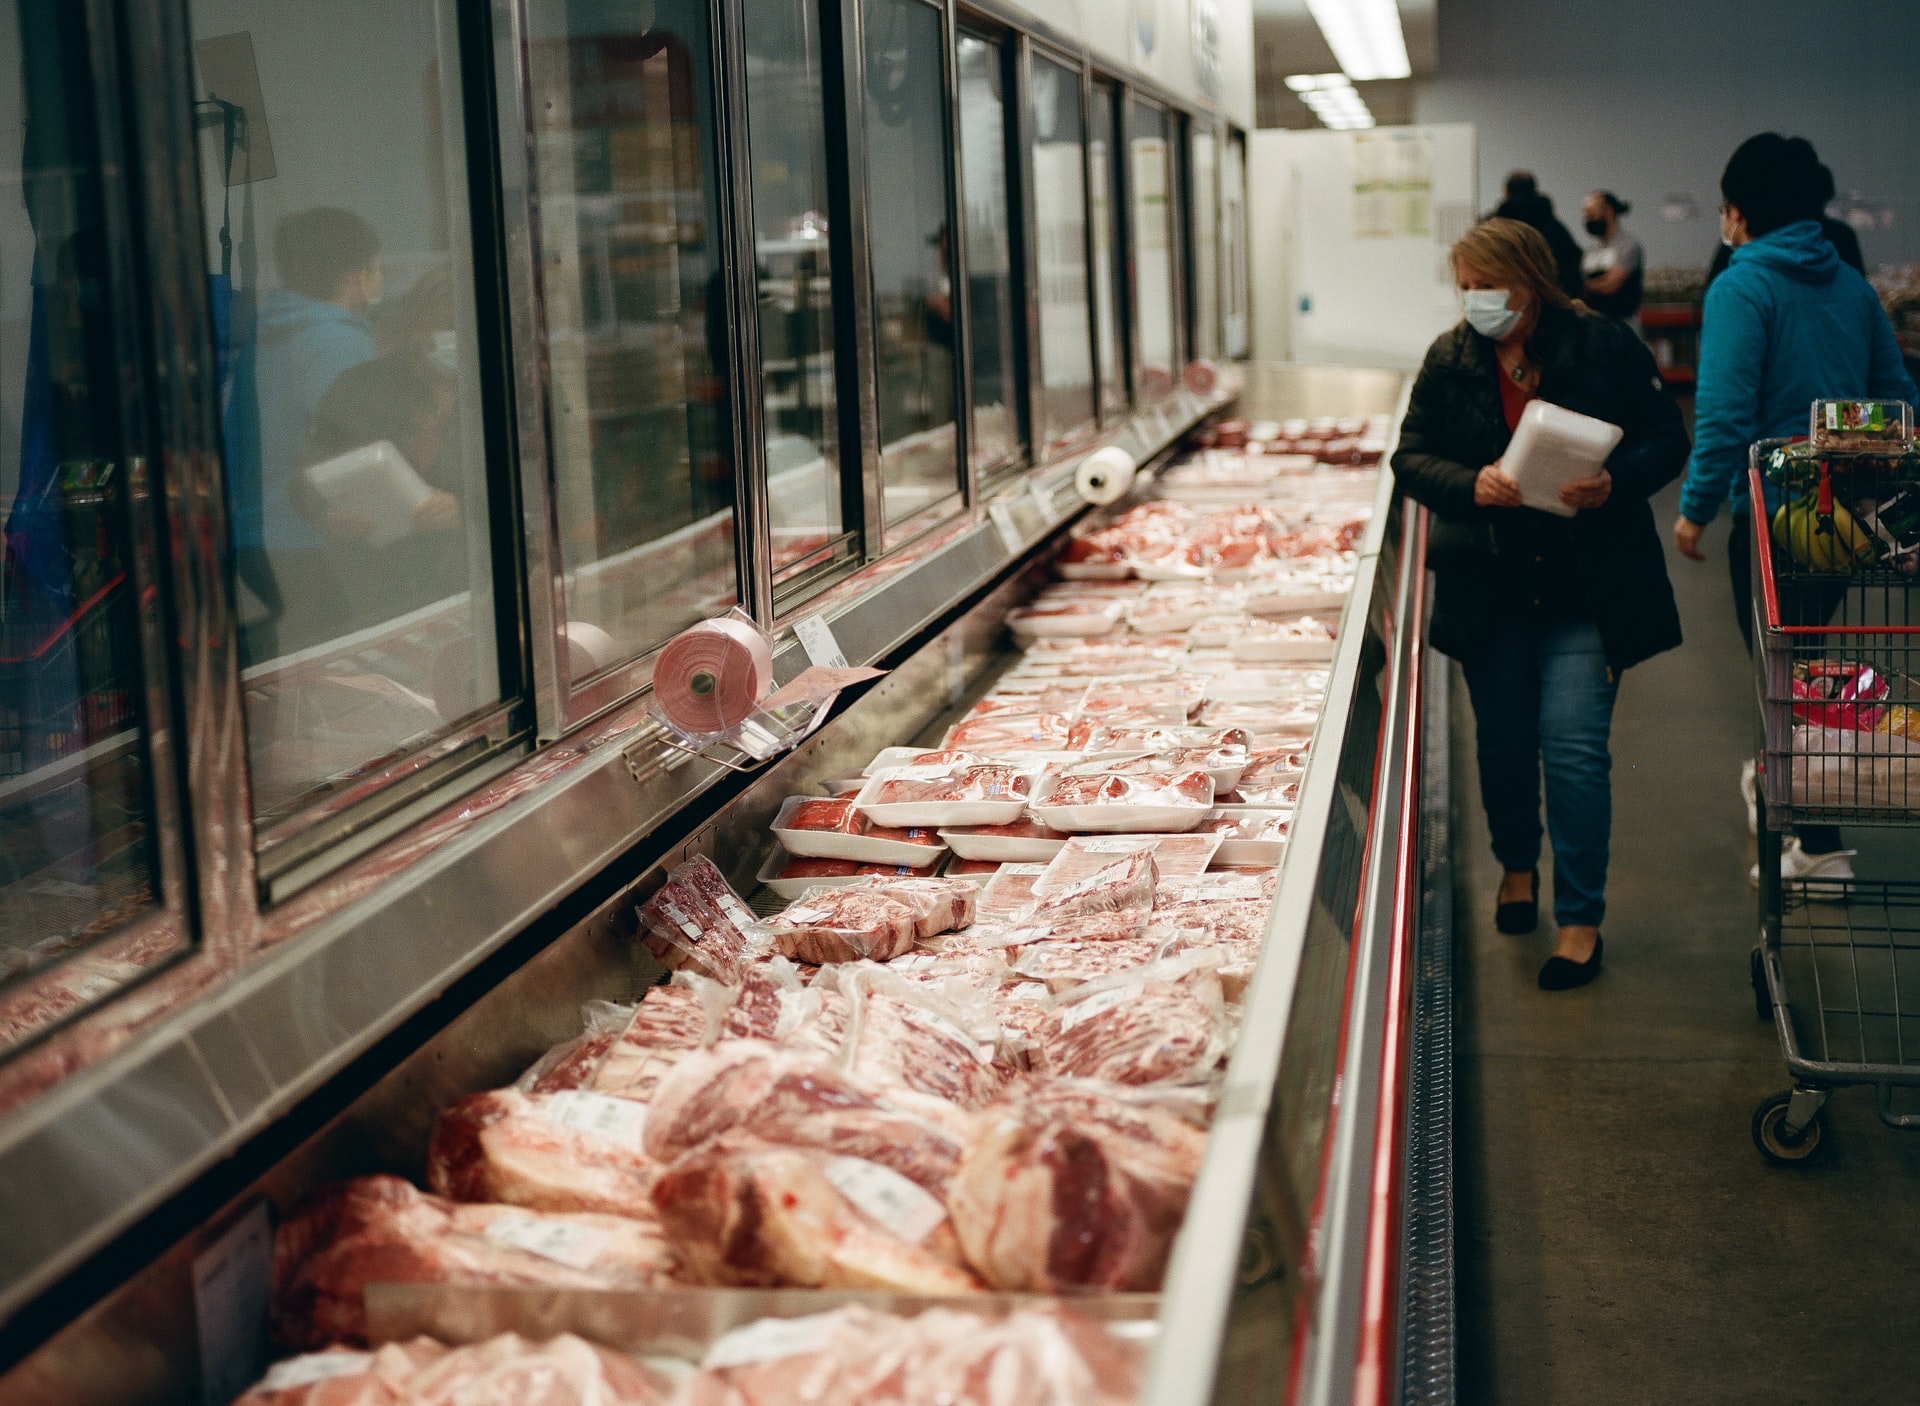 Image shows meat at grocery store